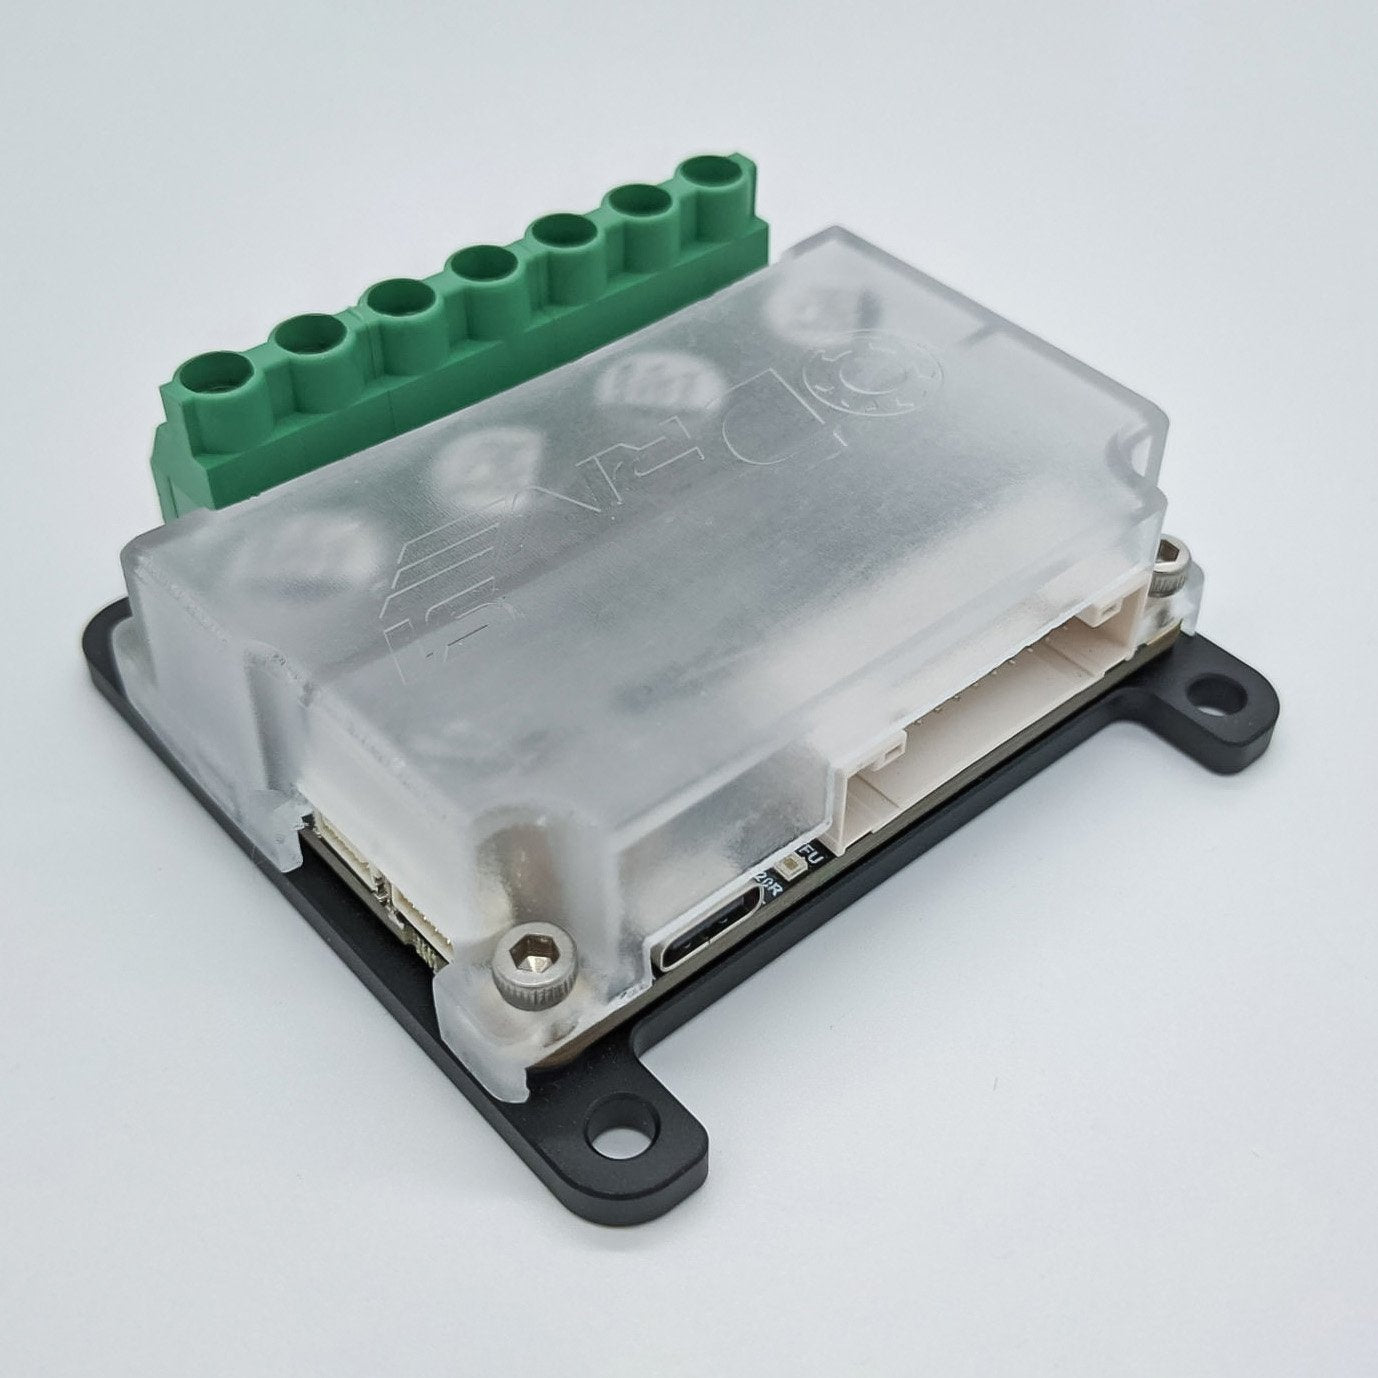 Enclosure for ODrive S1